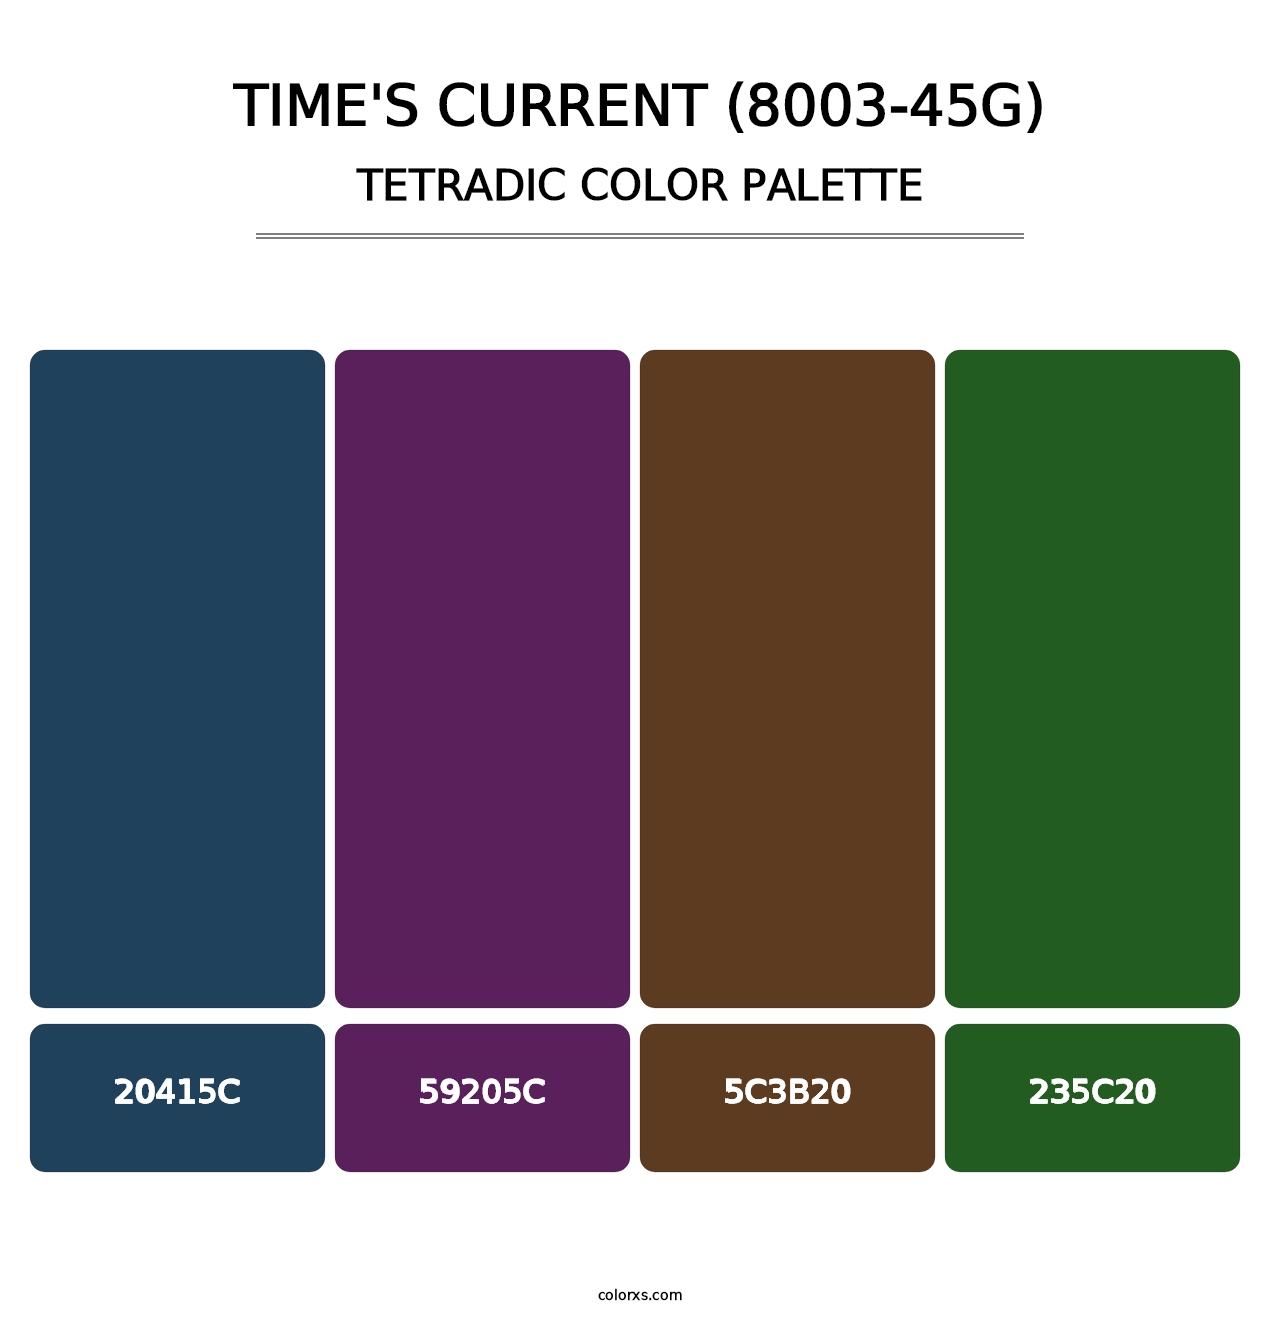 Time's Current (8003-45G) - Tetradic Color Palette